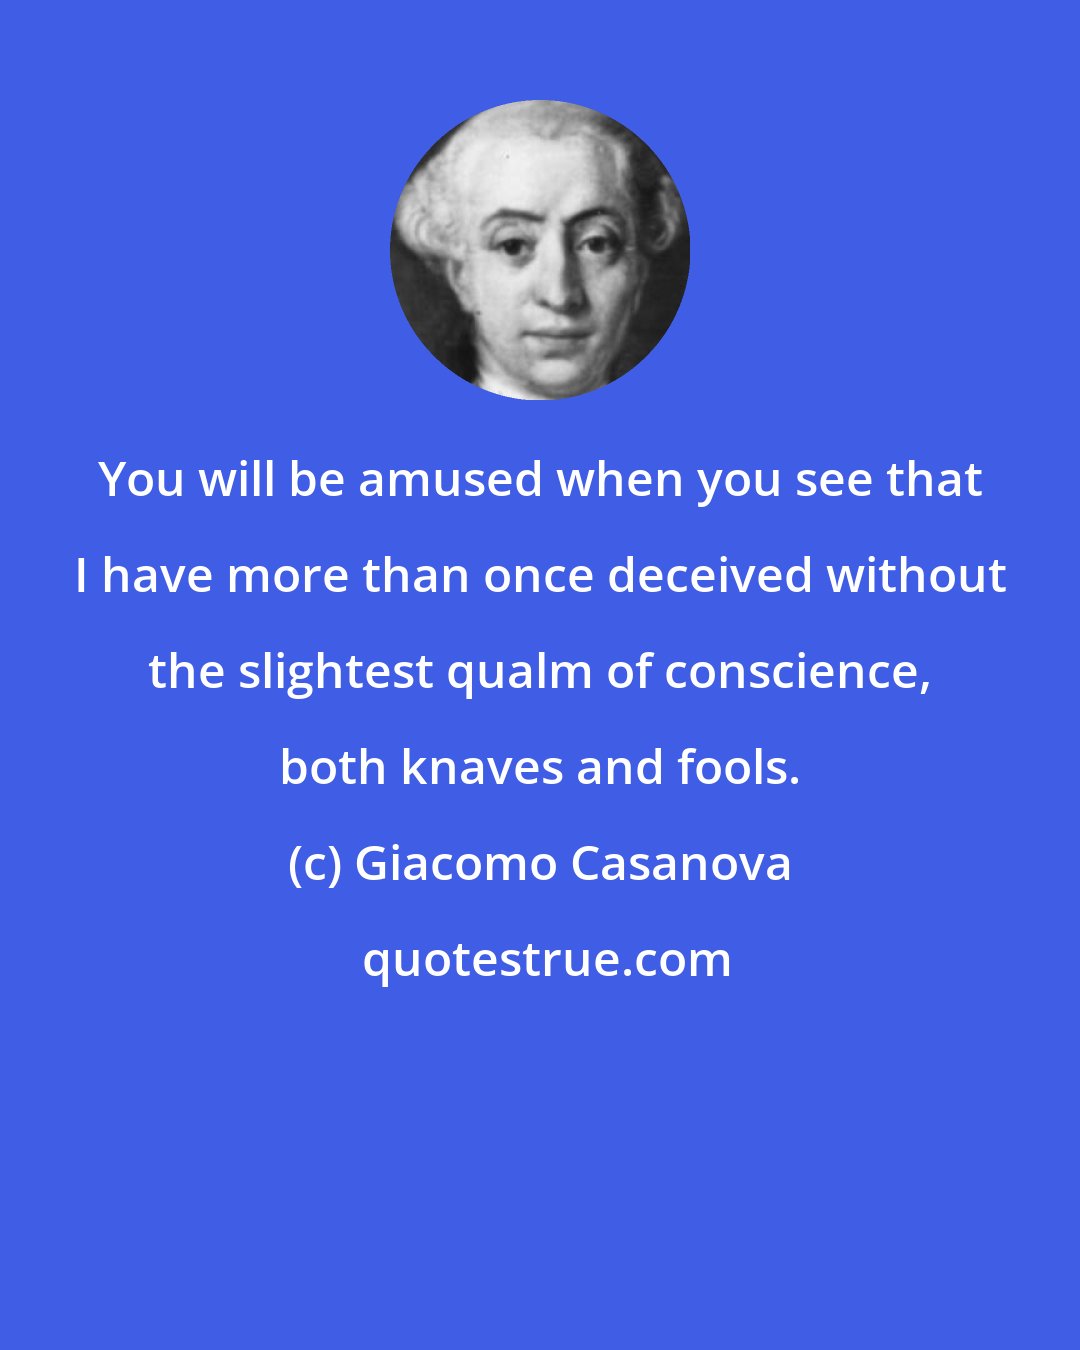 Giacomo Casanova: You will be amused when you see that I have more than once deceived without the slightest qualm of conscience, both knaves and fools.